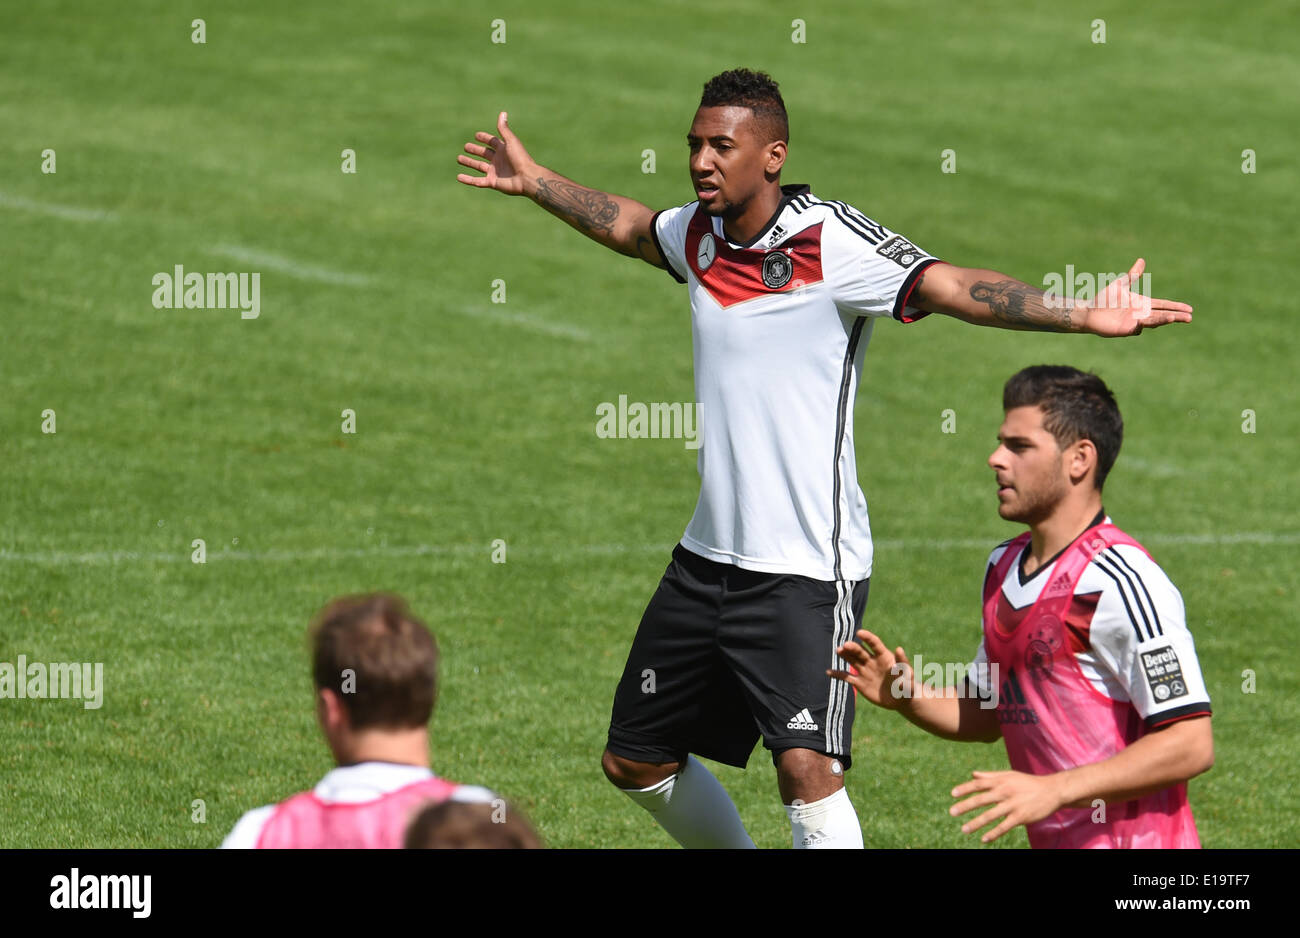 Passeier, Italy. 28th May, 2014. Jerome Boateng gestures during a training session on a training ground at St. Leonhard in Passeier, Italy, 28 May 2014. Germany's national soccer squad prepares for the upcoming FIFA World Cup 2014 in Brazil at a training camp in South Tyrol until 30 May 2014. Photo: ANDREAS GEBERT/DPA/Alamy Live News Stock Photo